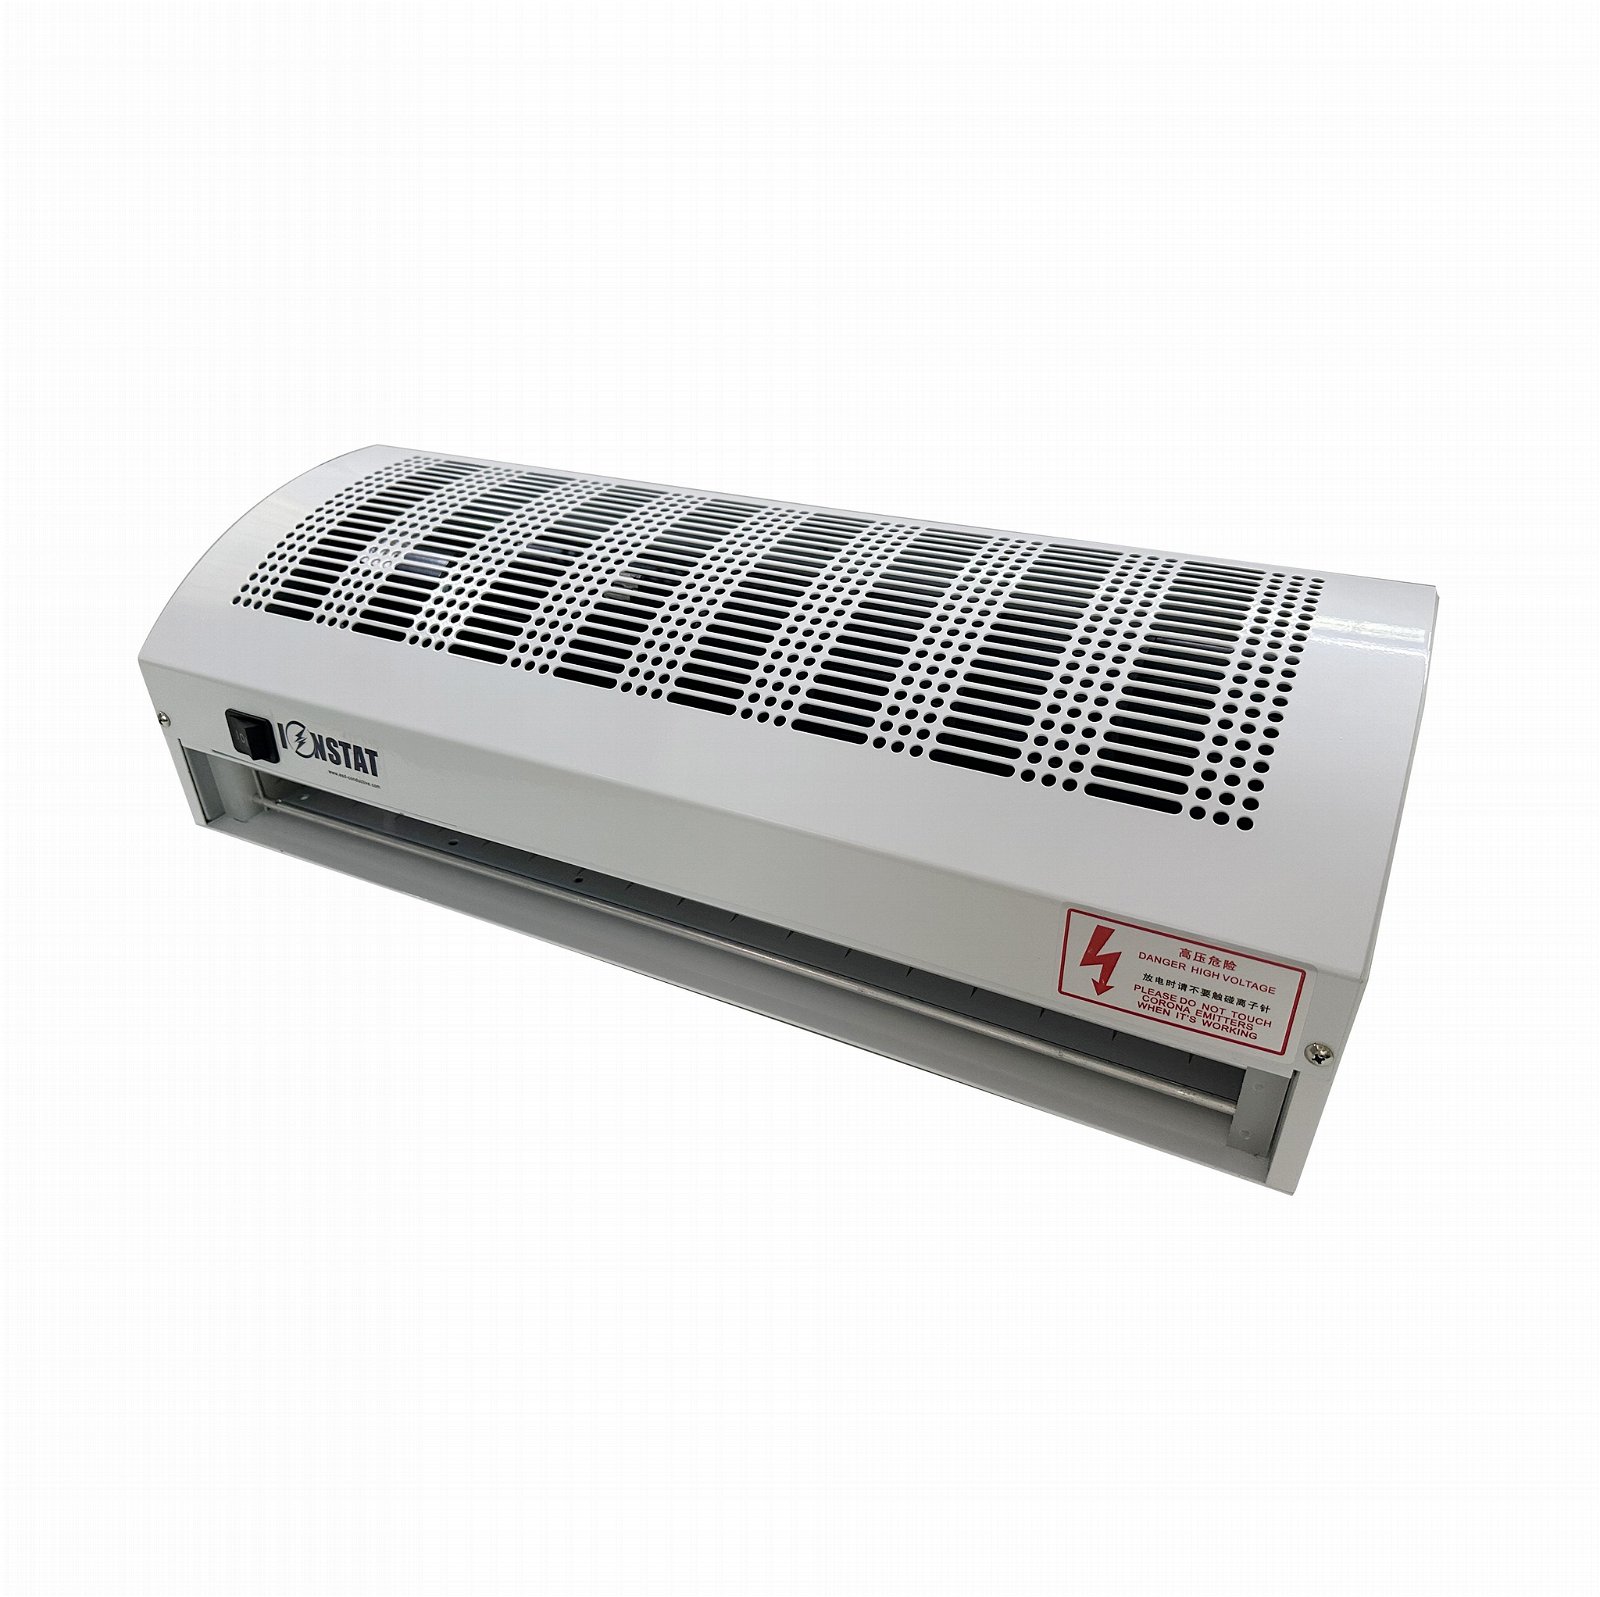 2m Far working Distance Statice 600-1800mm Eliminator Ionizing Air Curtain 2